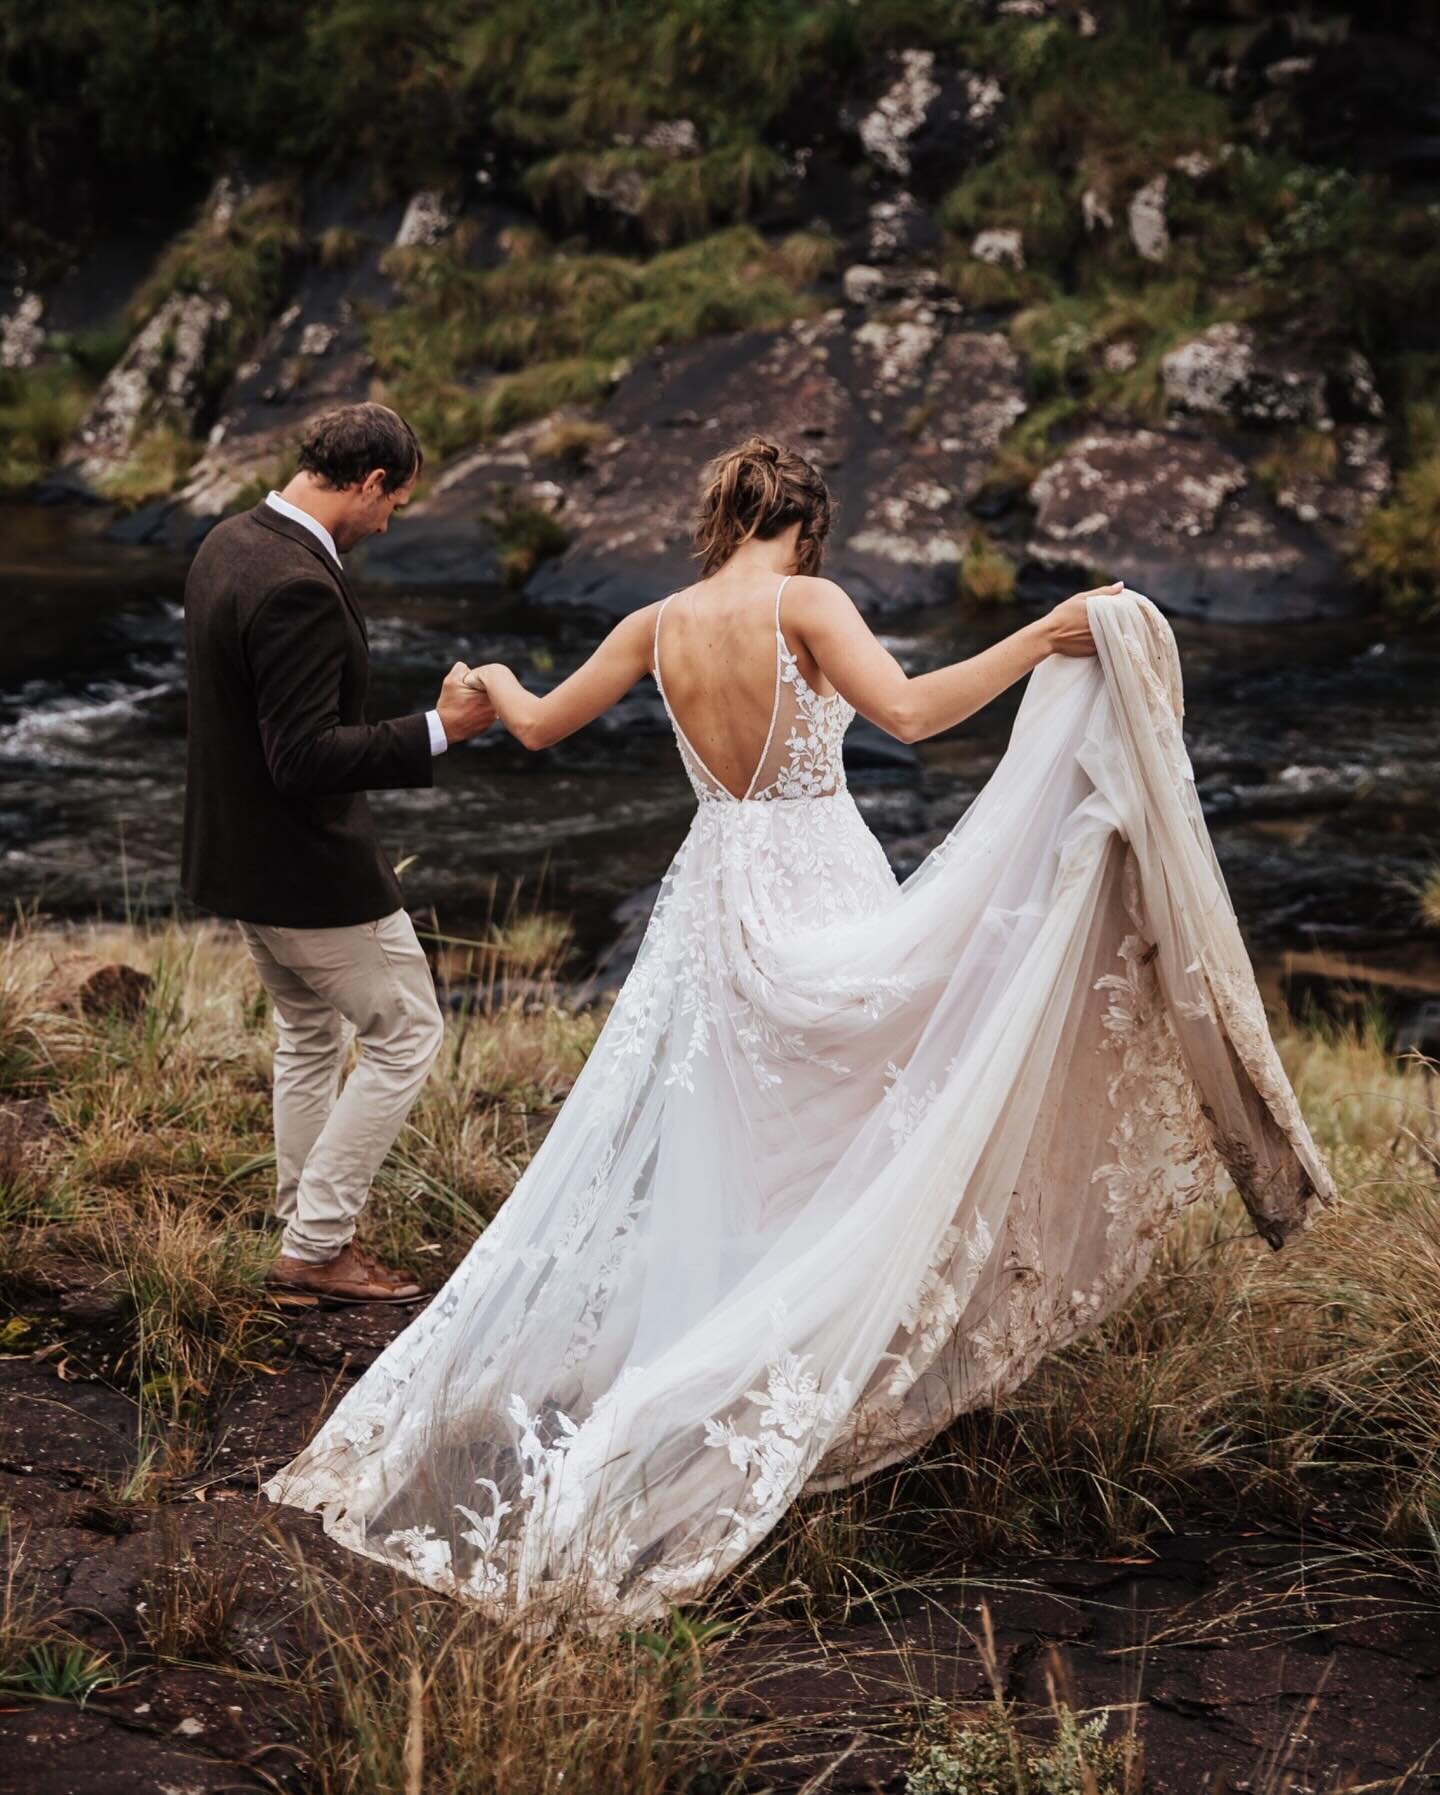 Barefoot &amp; Married 👣✨

Despite the rain - Jay &amp; Nix knocked this one out of the park and were such troopers getting wet &amp; muddy to nail this creative shoot! 

Venue - Brookfield Farm, Underberg 

@nicola.mccord 
@jay_stay17 
&bull;
&bull